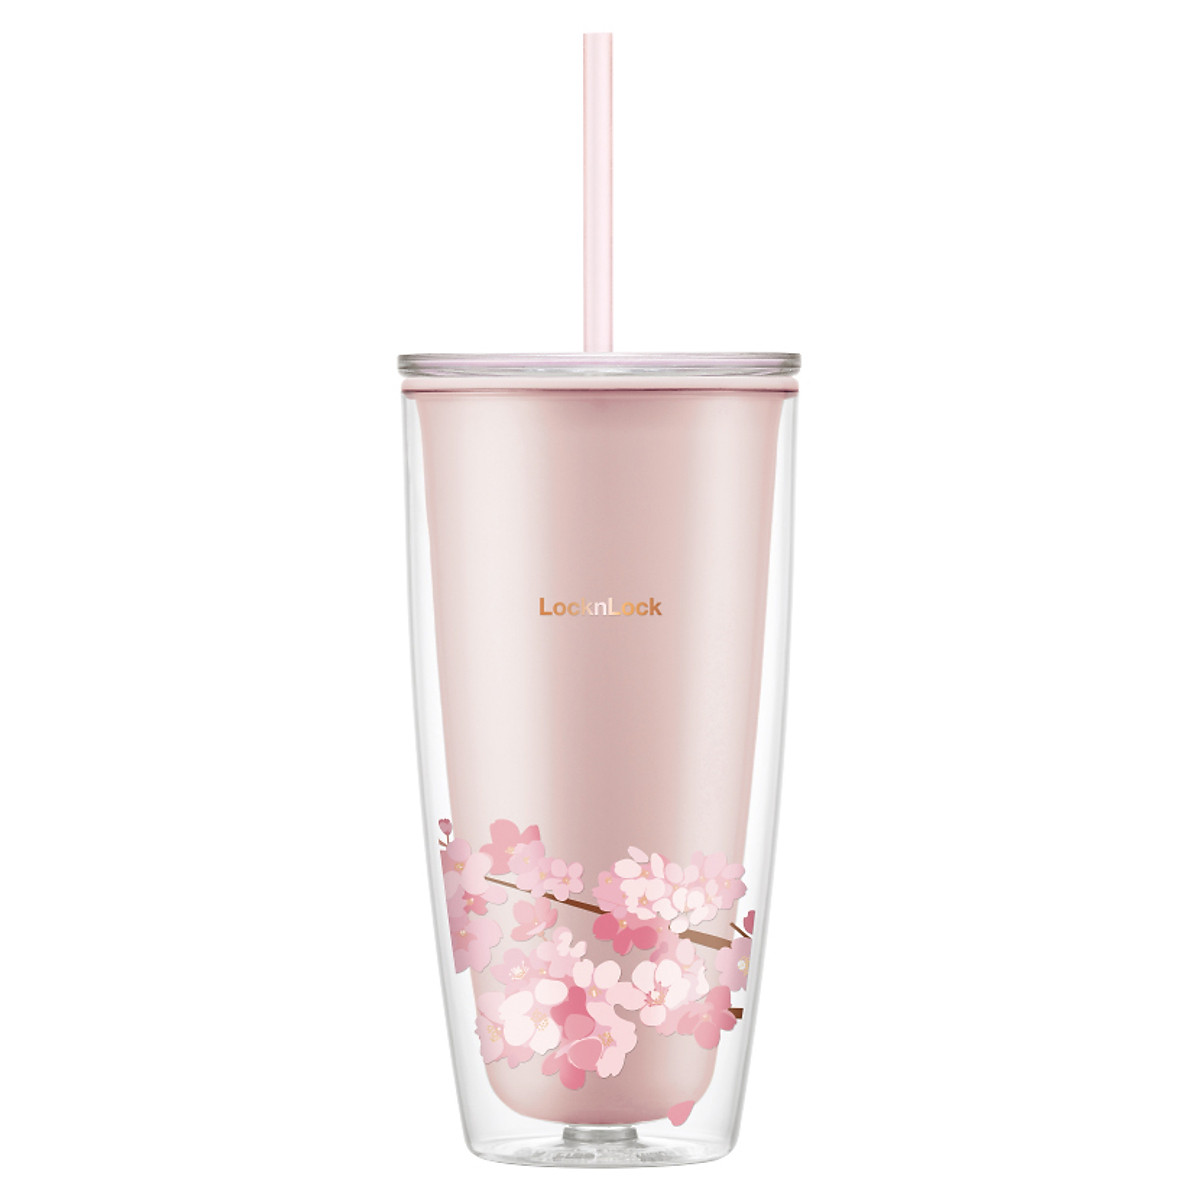 Ly Nhựa 2 Lớp LocknLock Double Wall Cold Cup Cherry Blossom 750ml HAP509